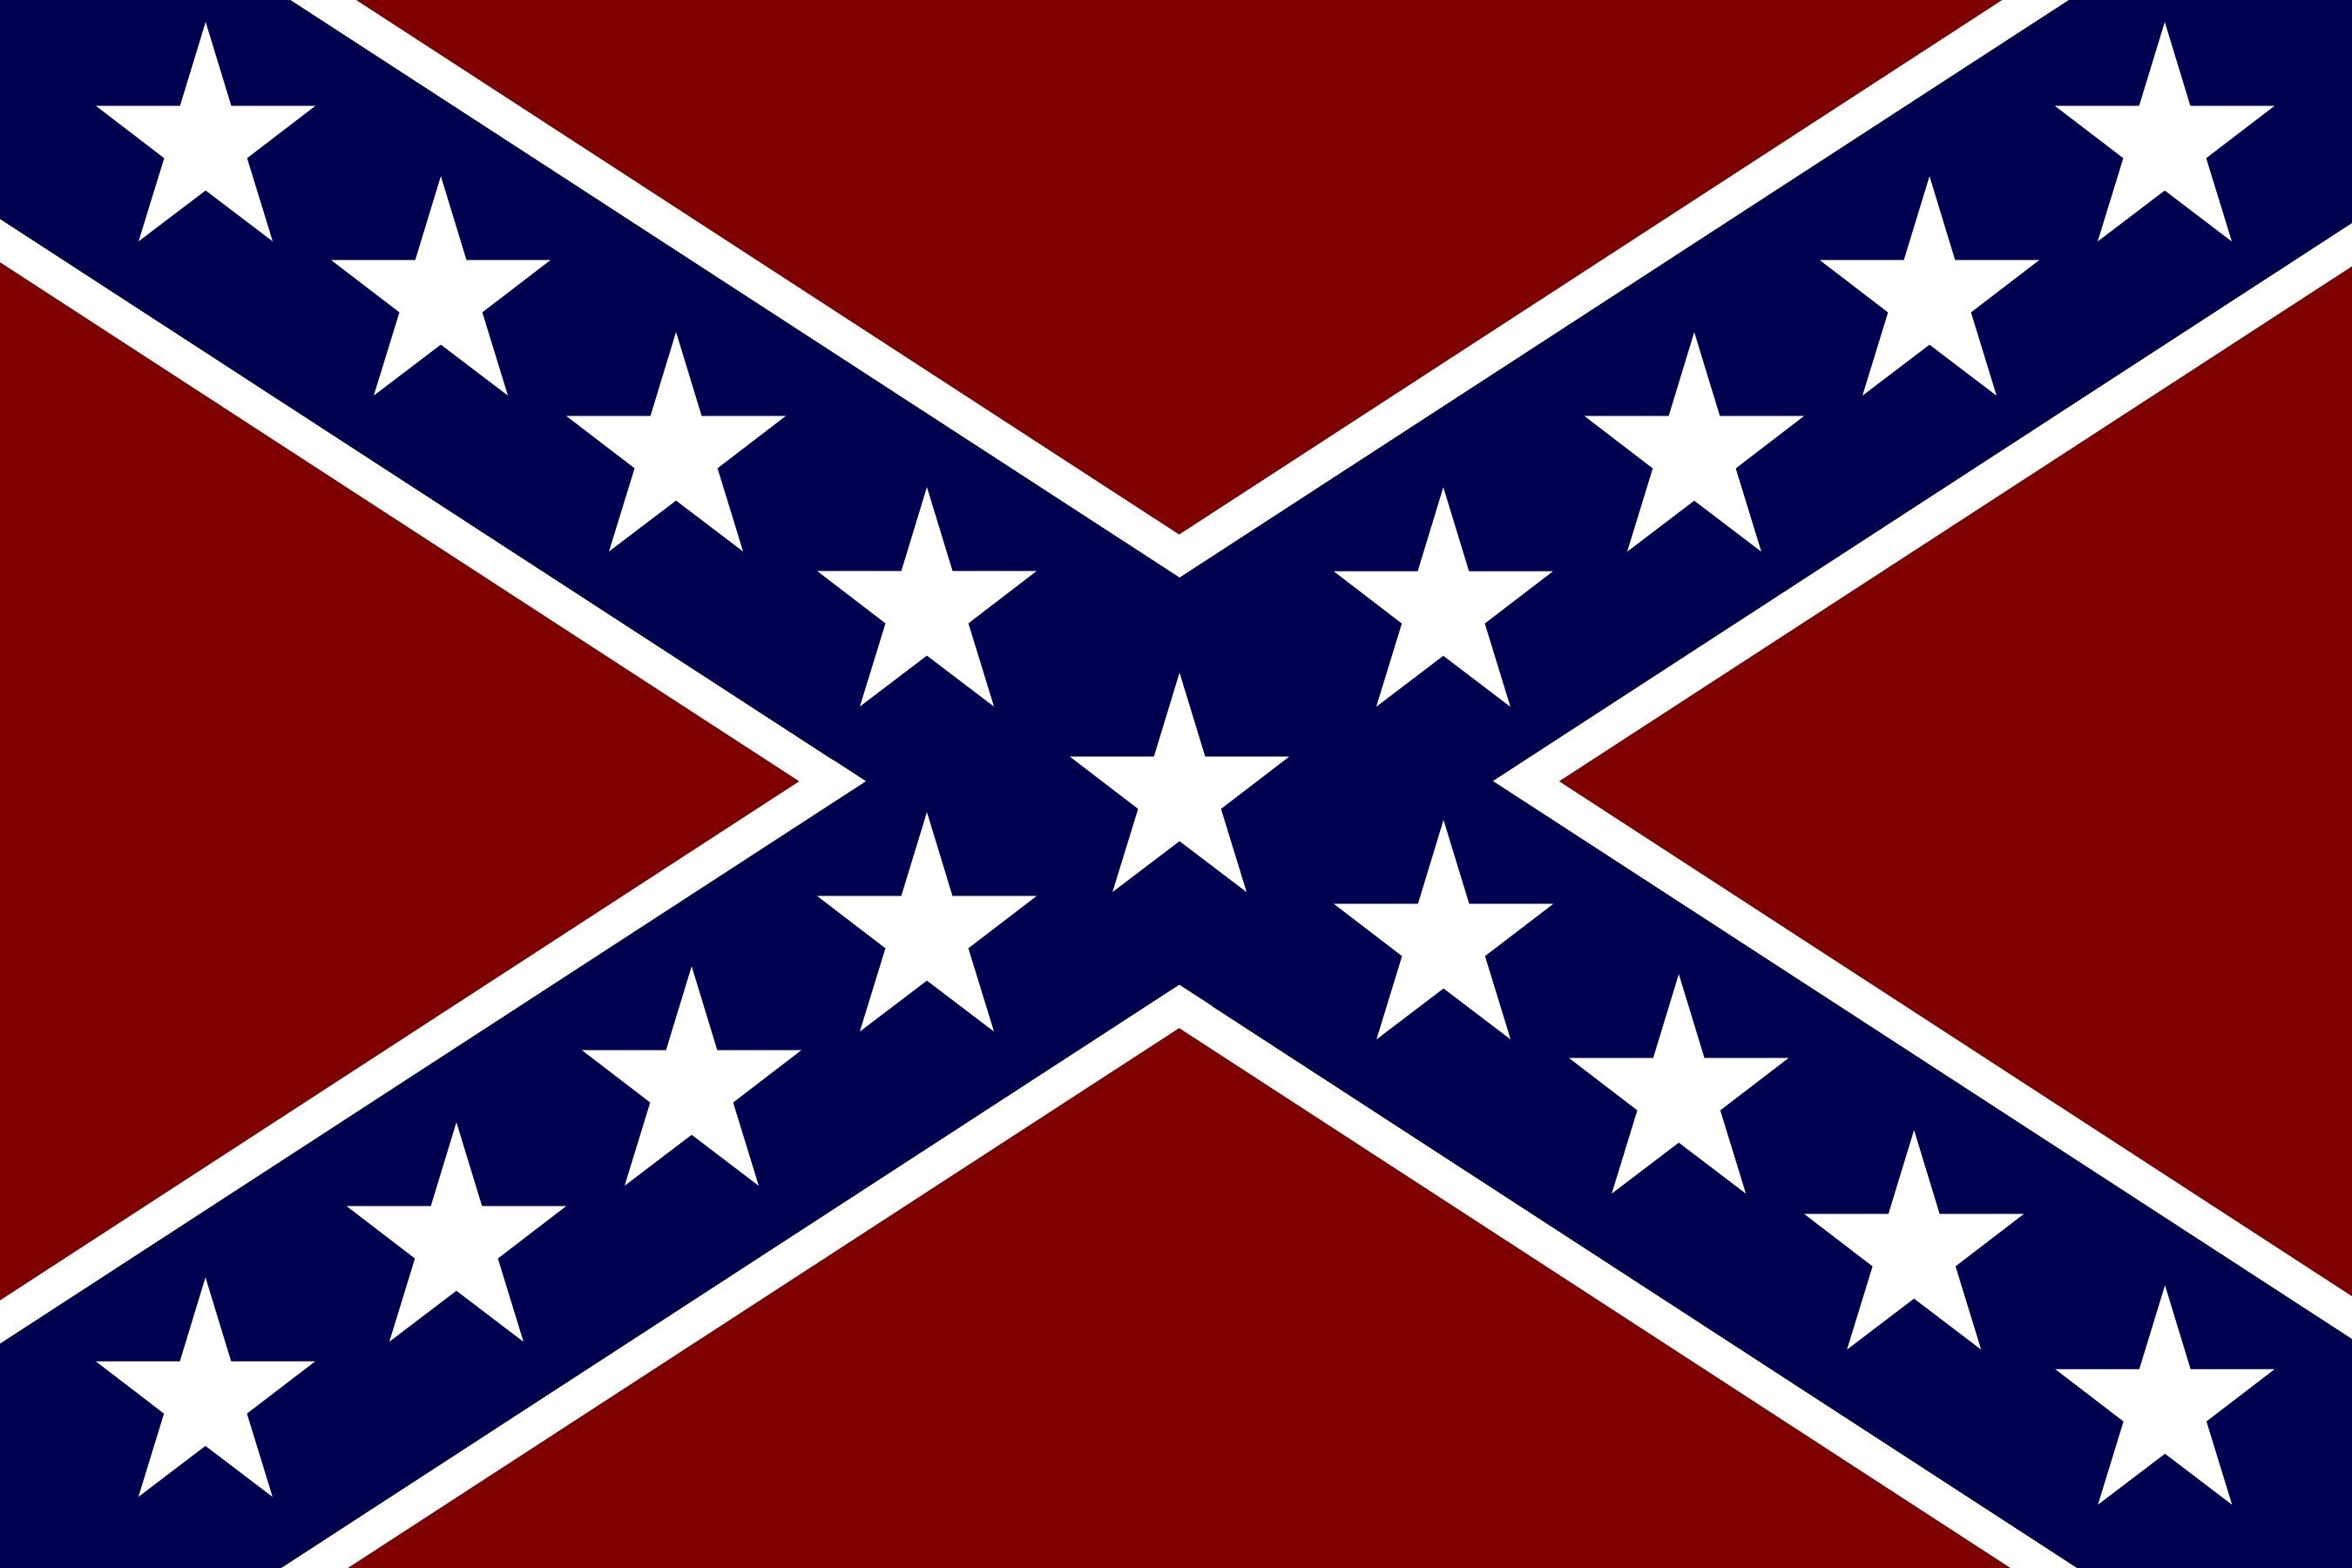 Free Rebel Flag Backgrounds Download Wallpapers, Backgrounds